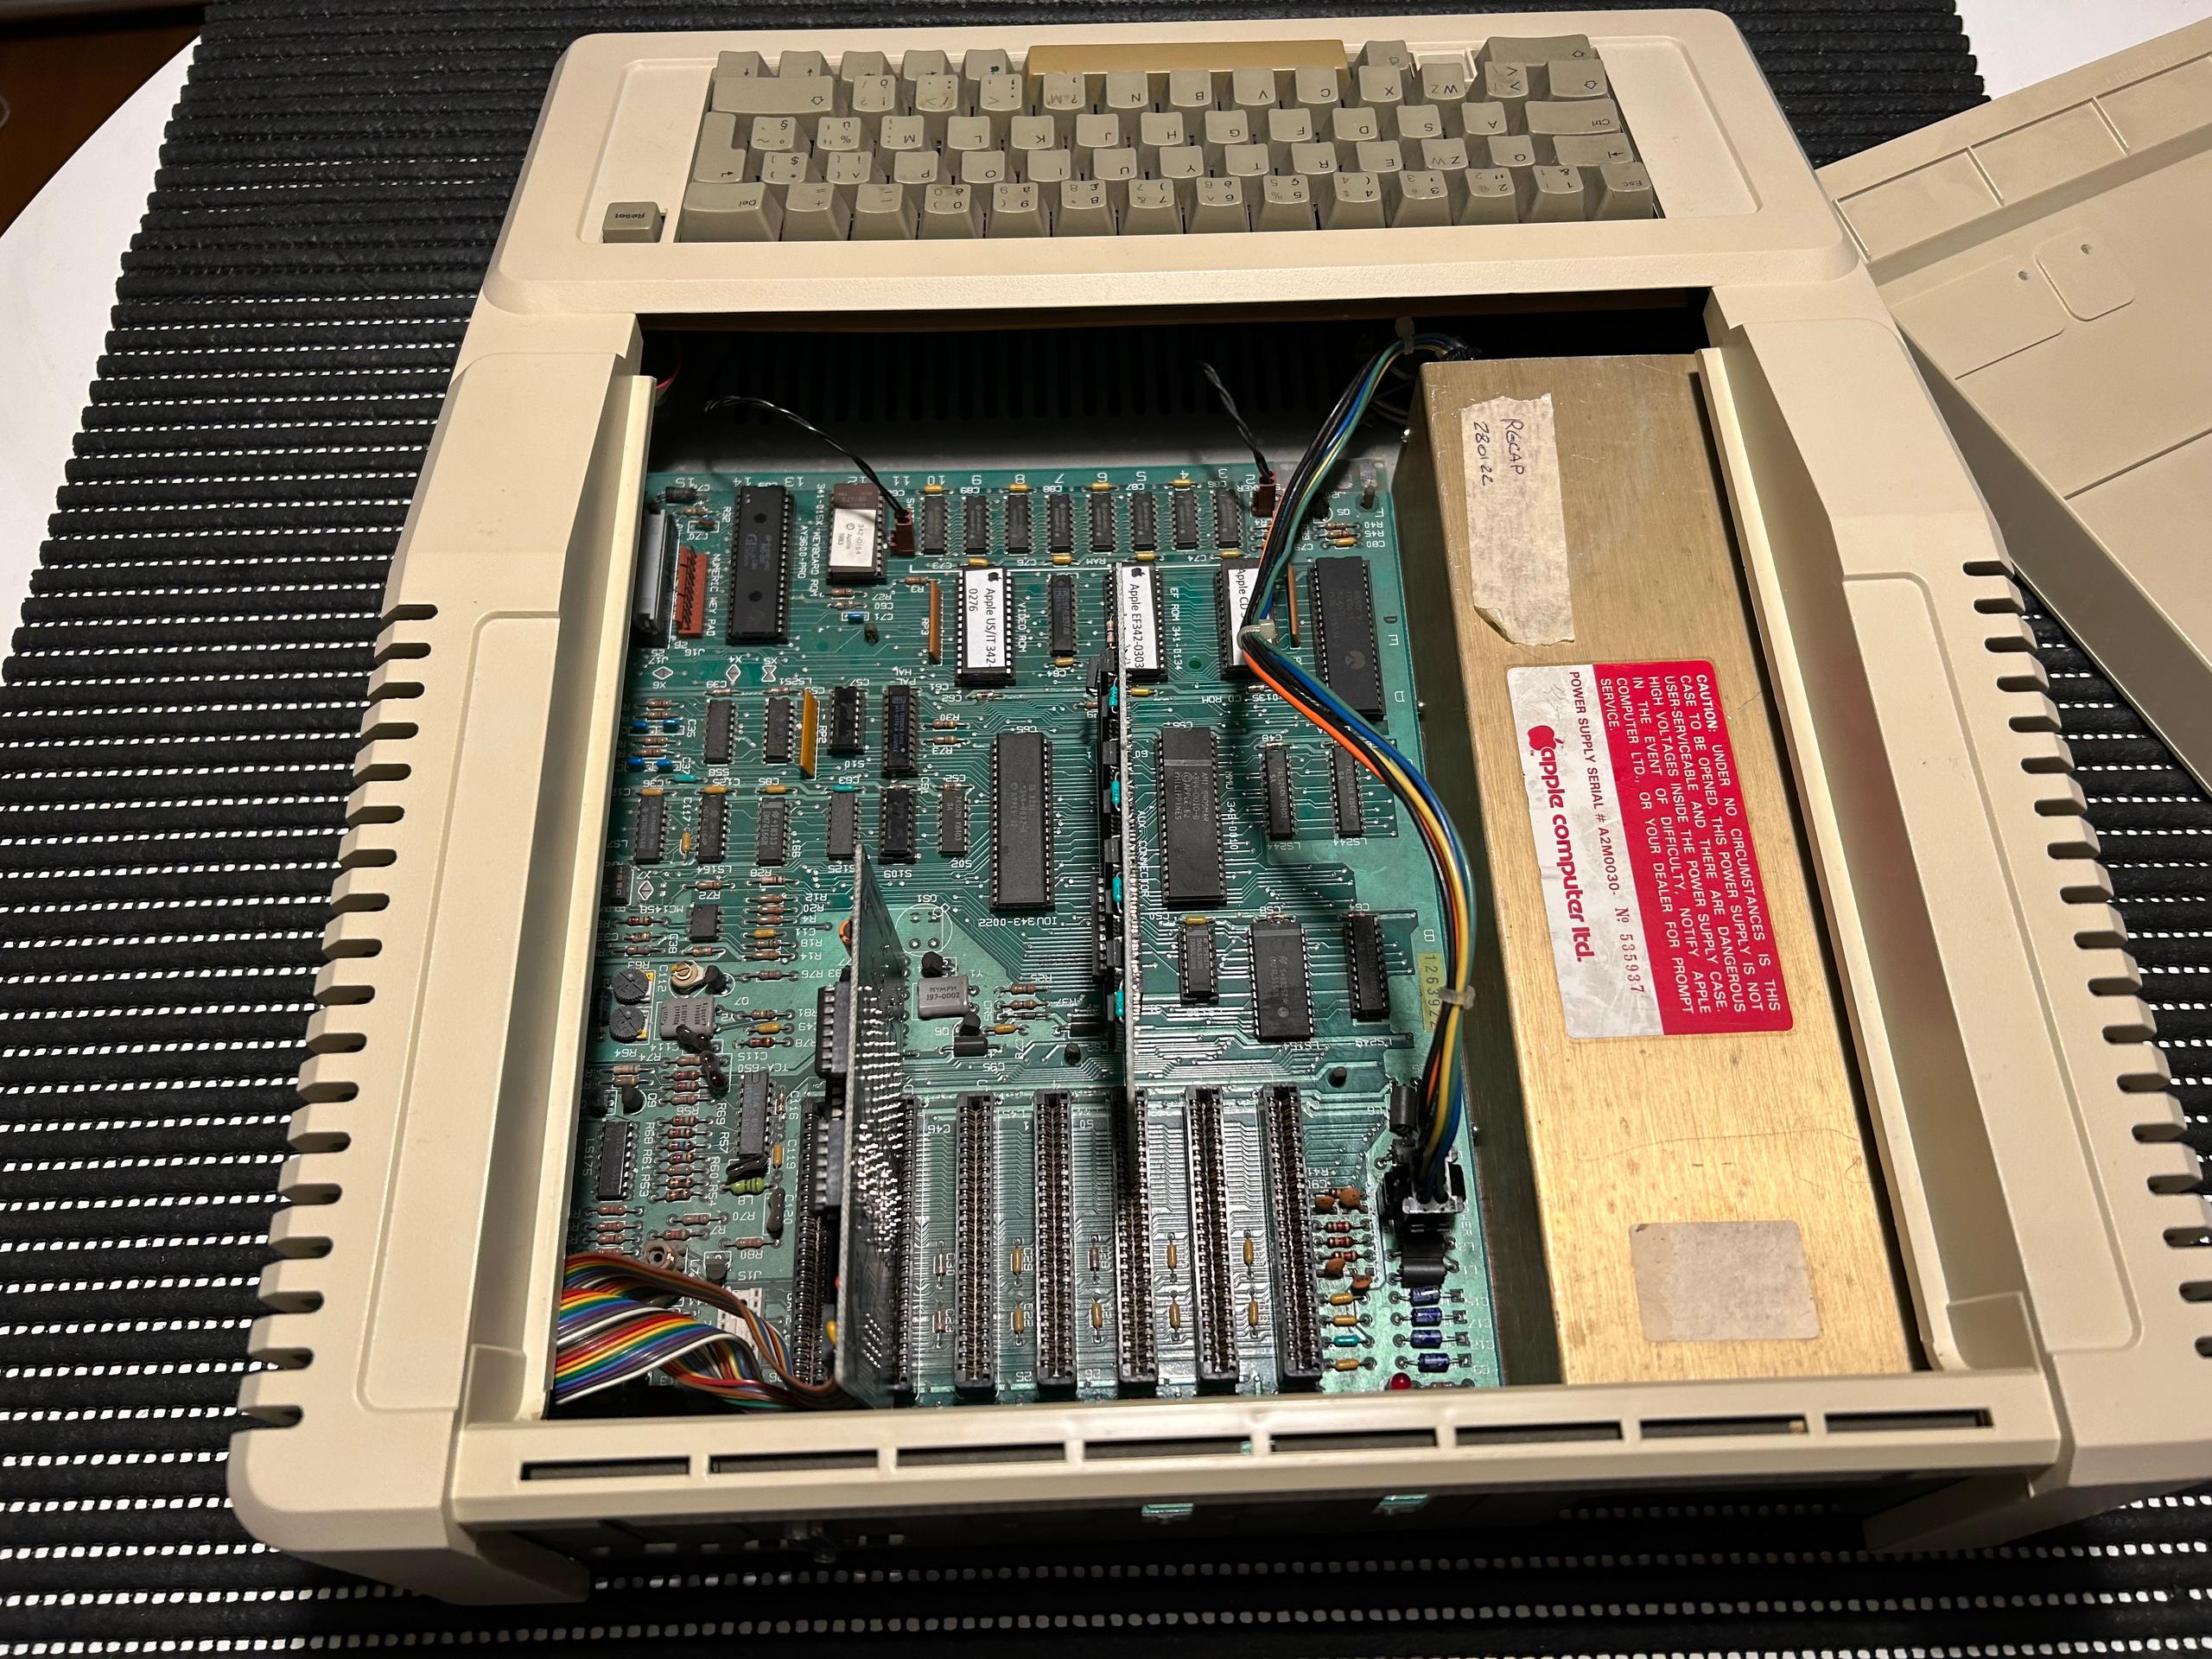 replaced processor with 65C02 and eprom for Enhanced version